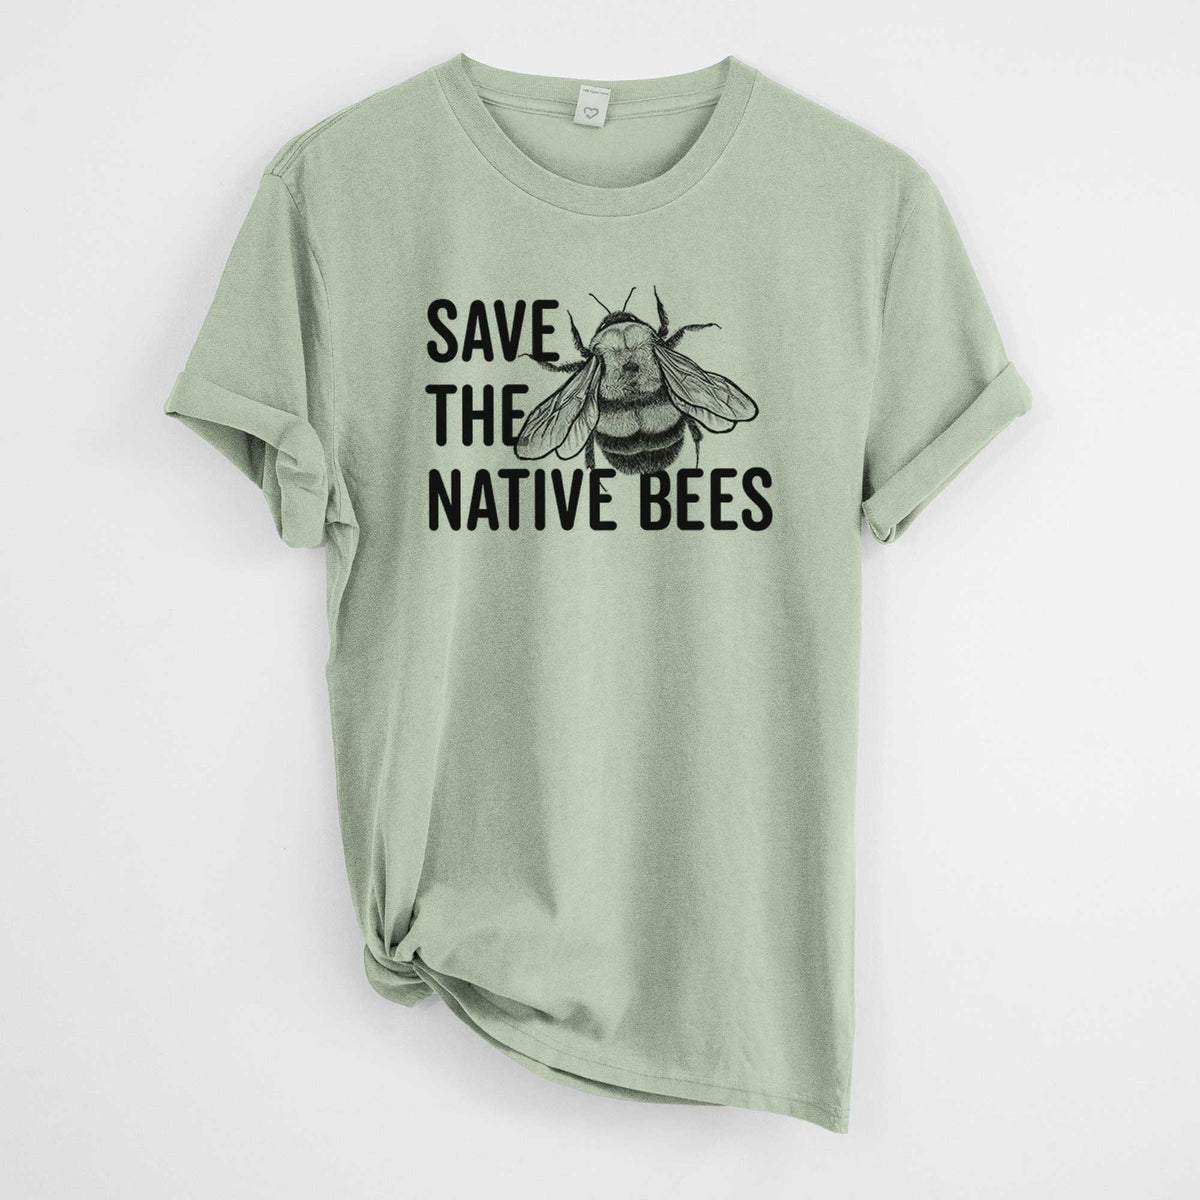 Save the Native Bees -  Mineral Wash 100% Organic Cotton Short Sleeve